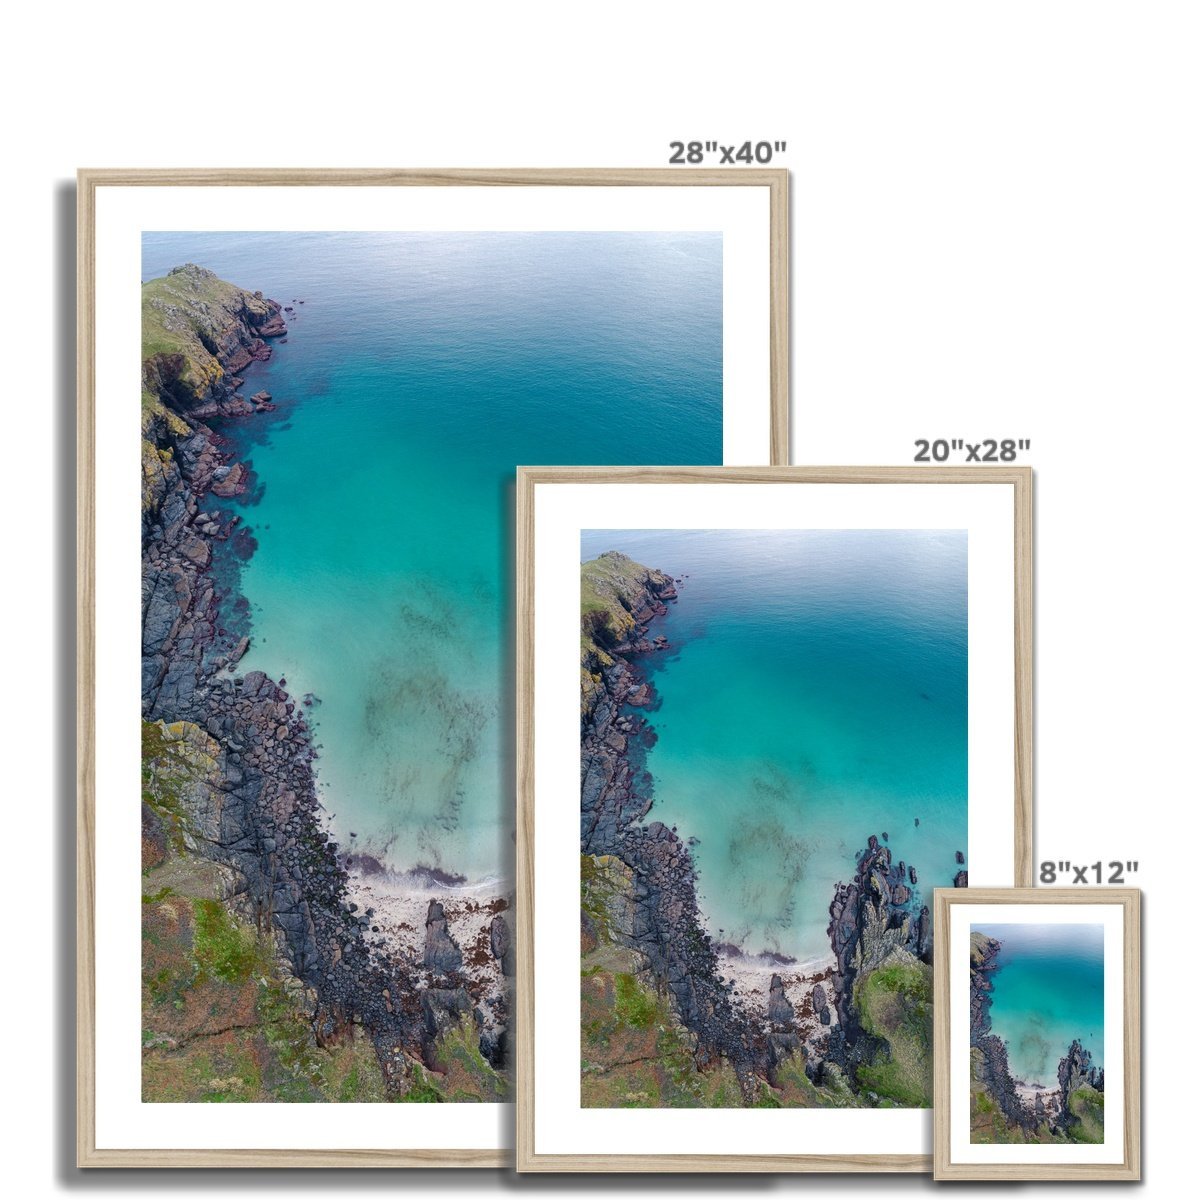 housel bay from above frame sizes